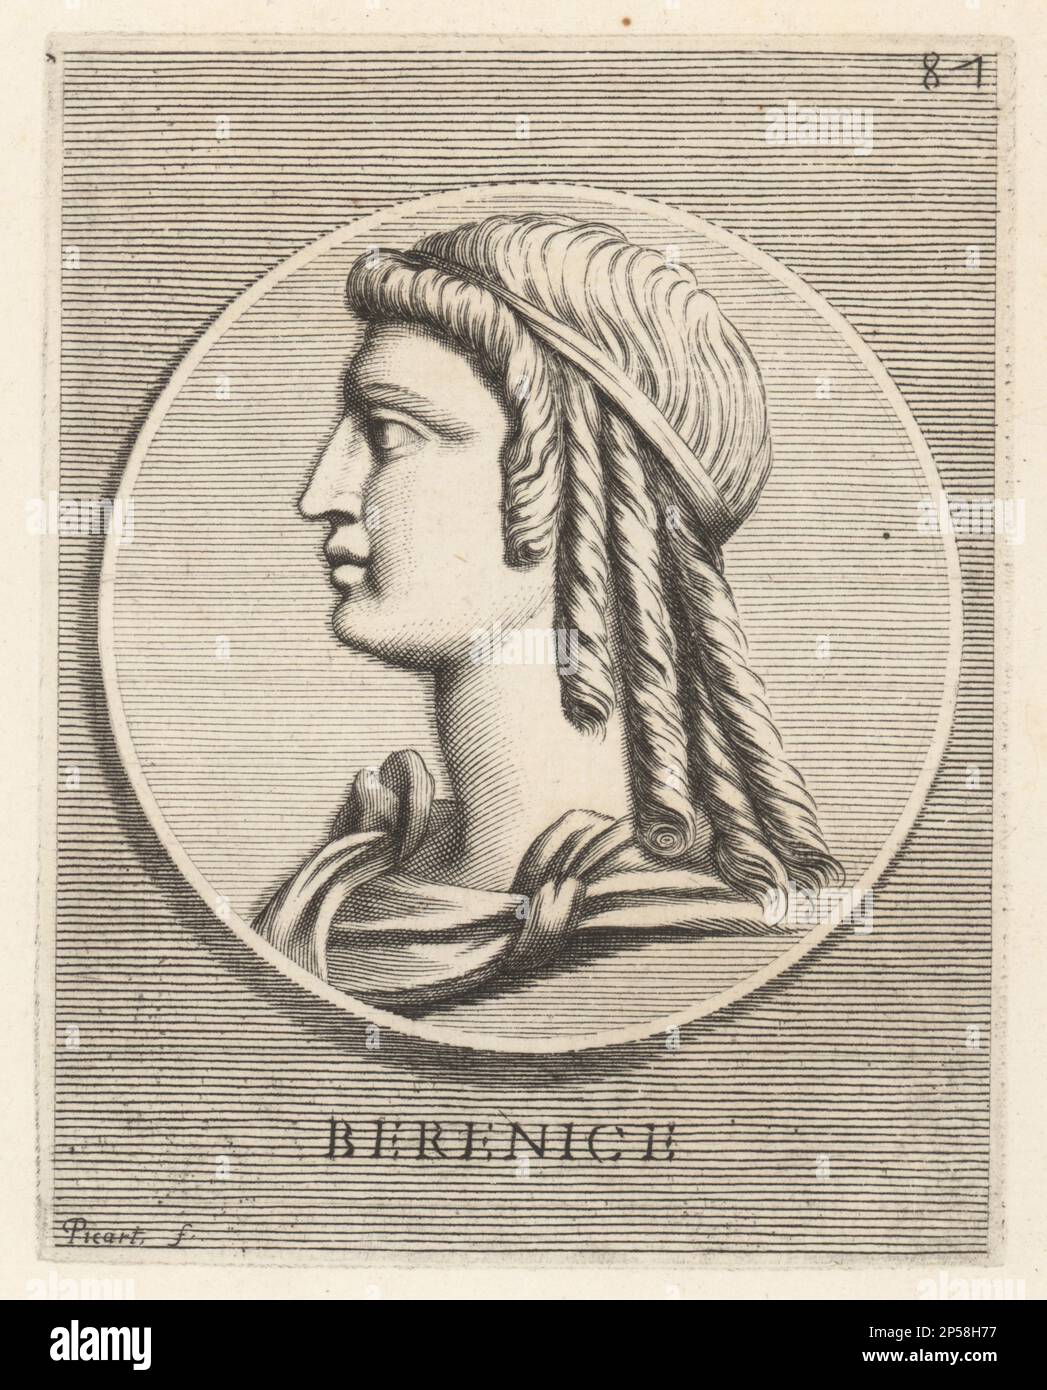 Berenice I, c. 340-268 BC, Queen of Egypt by marriage to Ptolemy I Soter. Second queen, after Eurydice, of the Ptolemaic dynasty of Egypt. Wearing her hair in ringlets under a royal diadem. Berenice. Copperplate engraving by Etienne Picart after Giovanni Angelo Canini from Iconografia, cioe disegni d'imagini de famosissimi monarchi, regi, filososi, poeti ed oratori dell' Antichita, Drawings of images of famous monarchs, kings, philosophers, poets and orators of Antiquity, Ignatio de’Lazari, Rome, 1699. Stock Photo